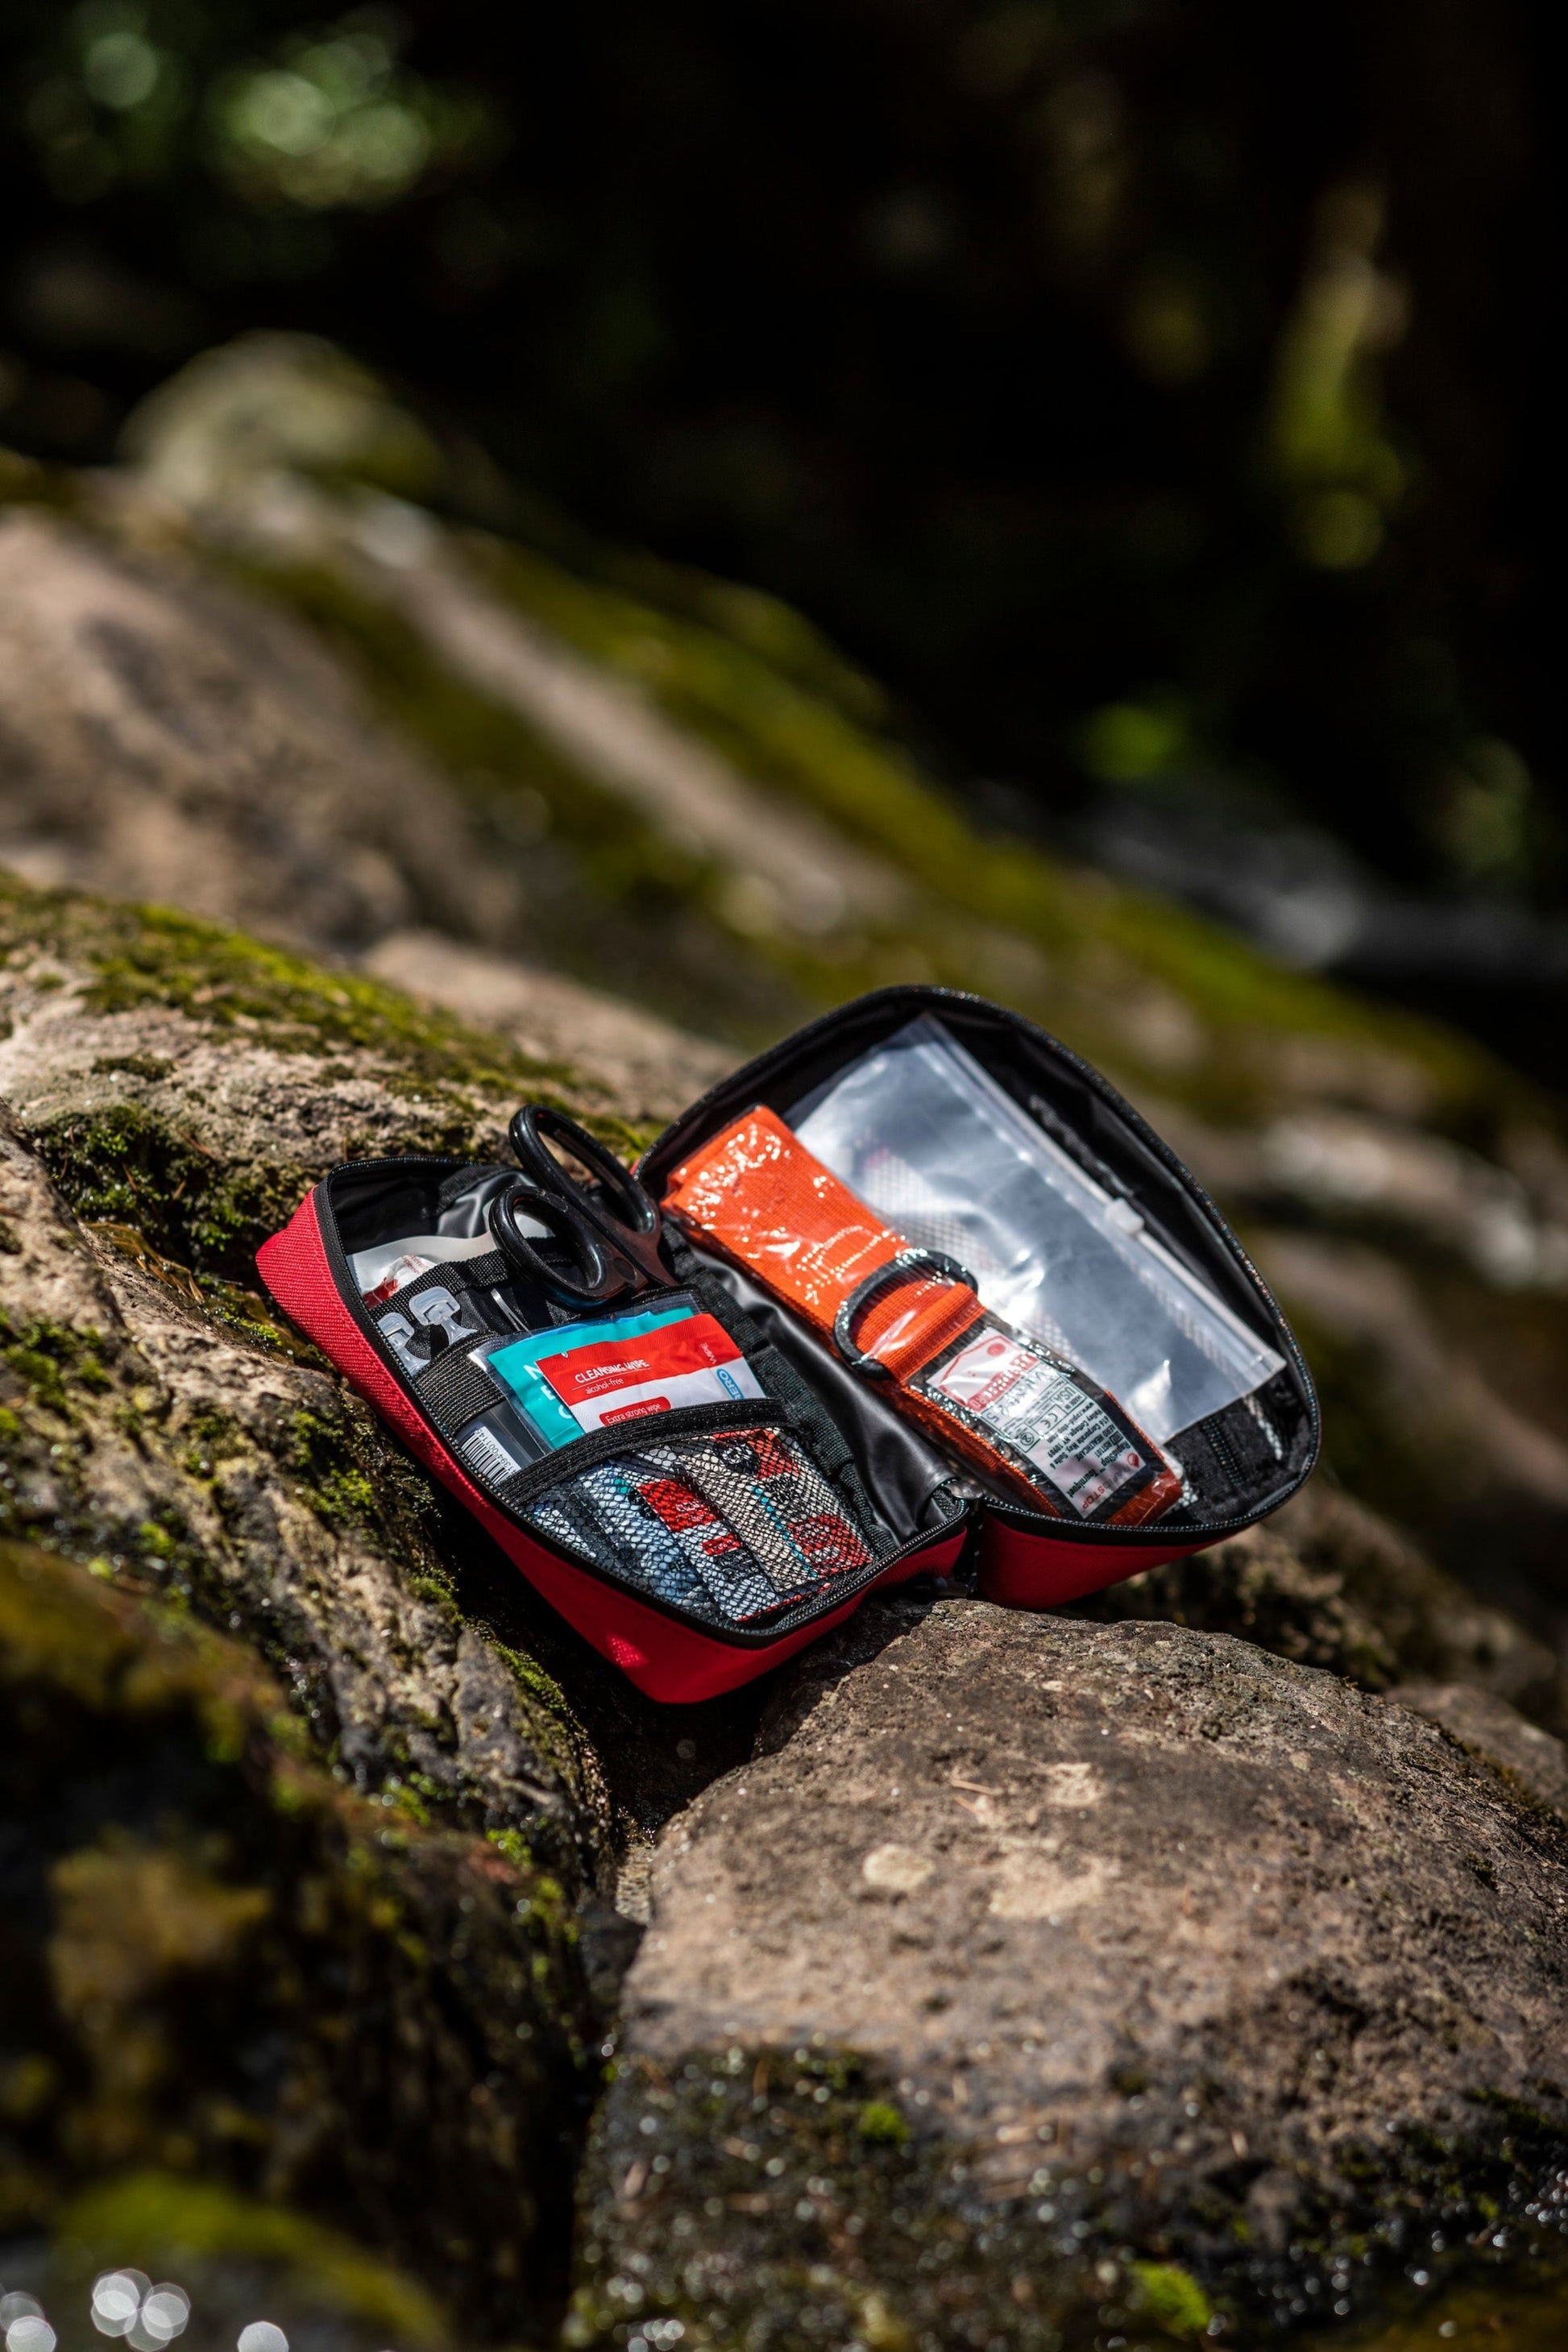 Well organised and tough lightweight first aid kit for hunting and hiking in New Zealand. From Great Walks to family trips.